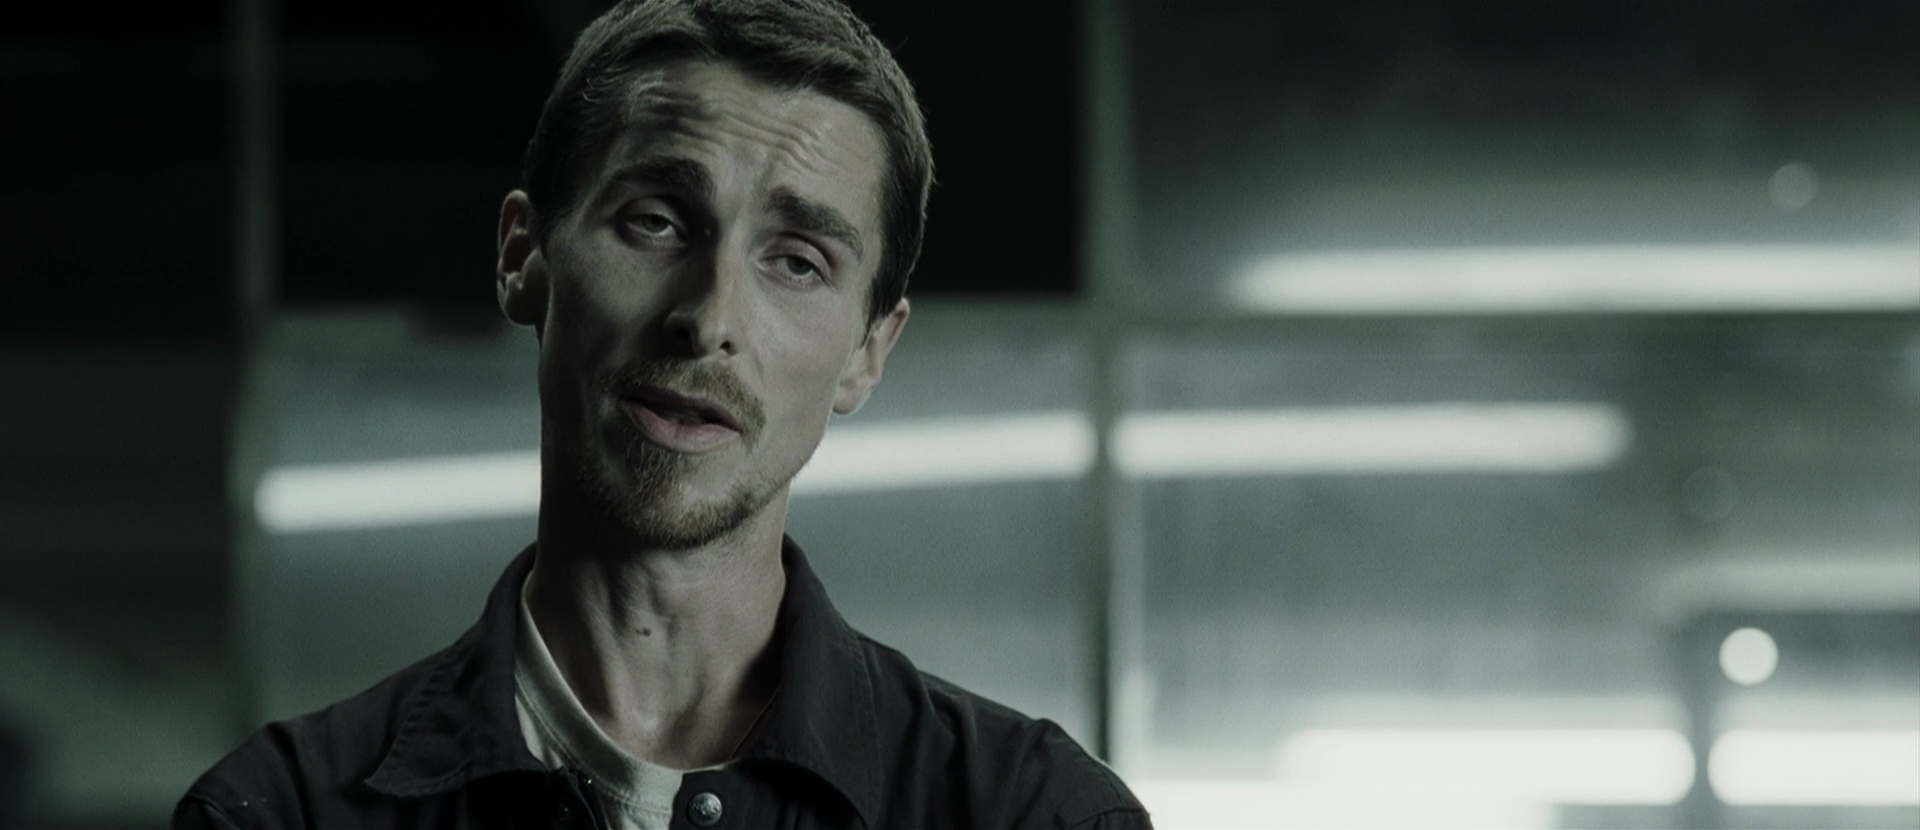 Images of The Machinist | 1920x830